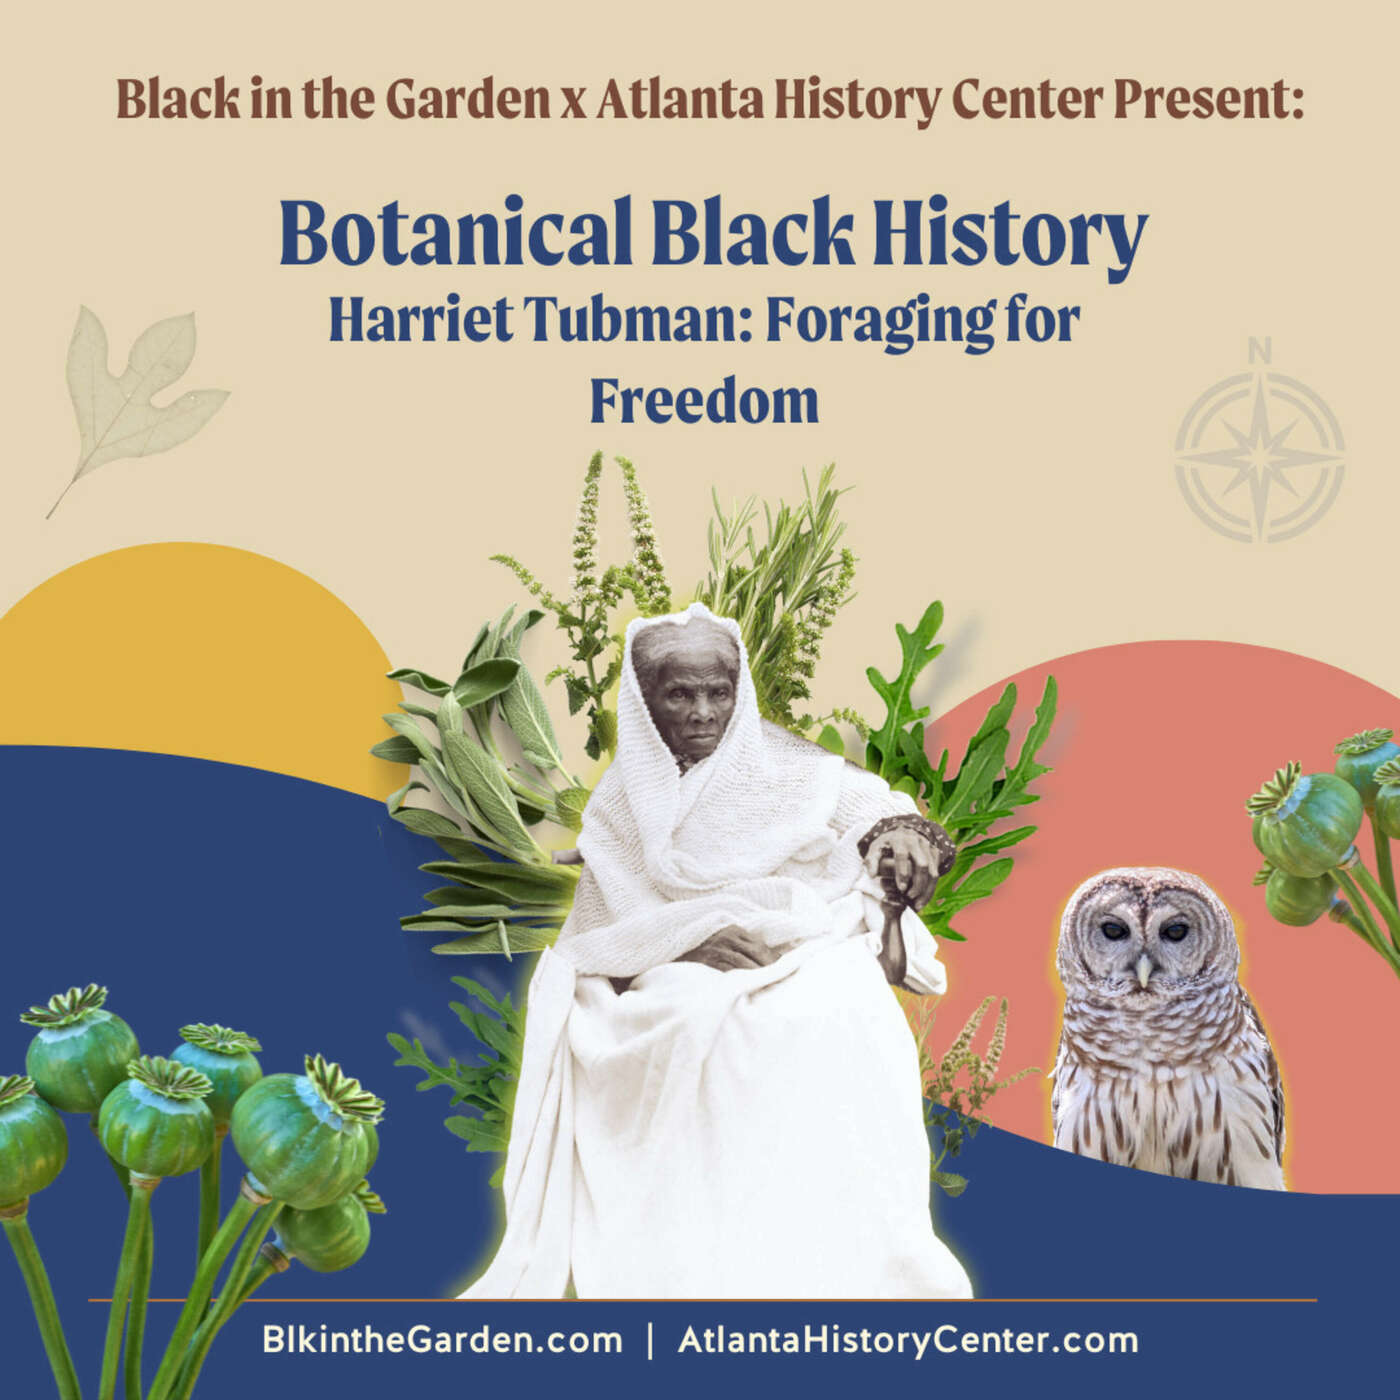 Foraging for Freedom: Harriet Tubman's Botanical Legacy